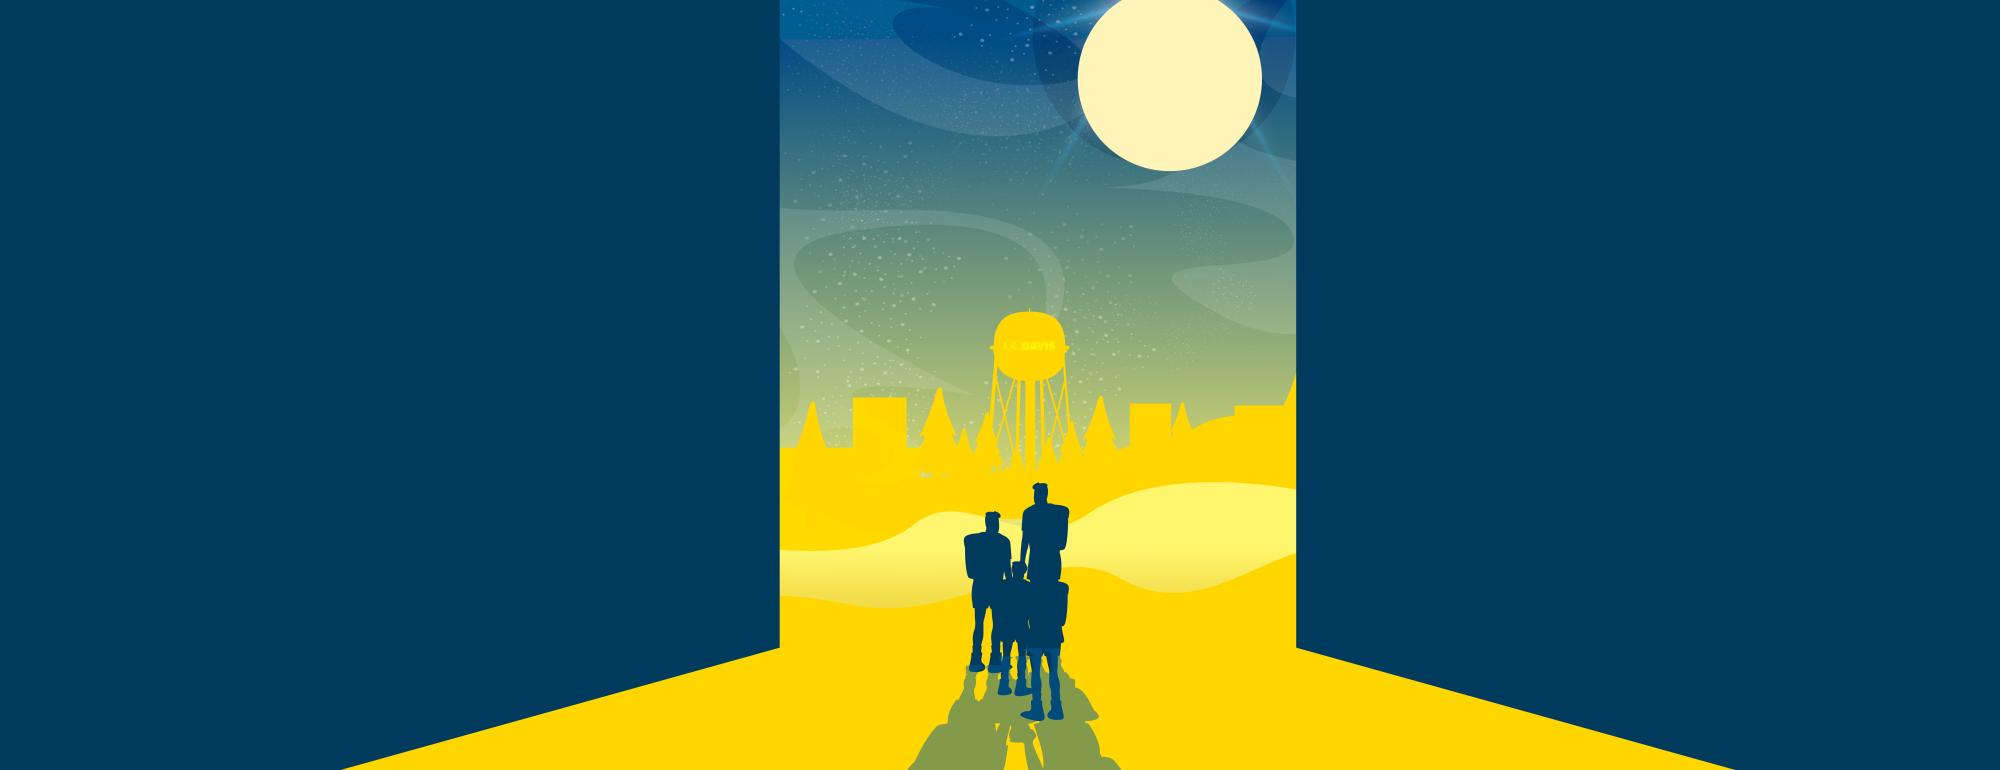 Graphic art design showing large dark blue door like images opening to a design of figures entering an area of light with a skyscape and skyline including the UC Davis water tower. 